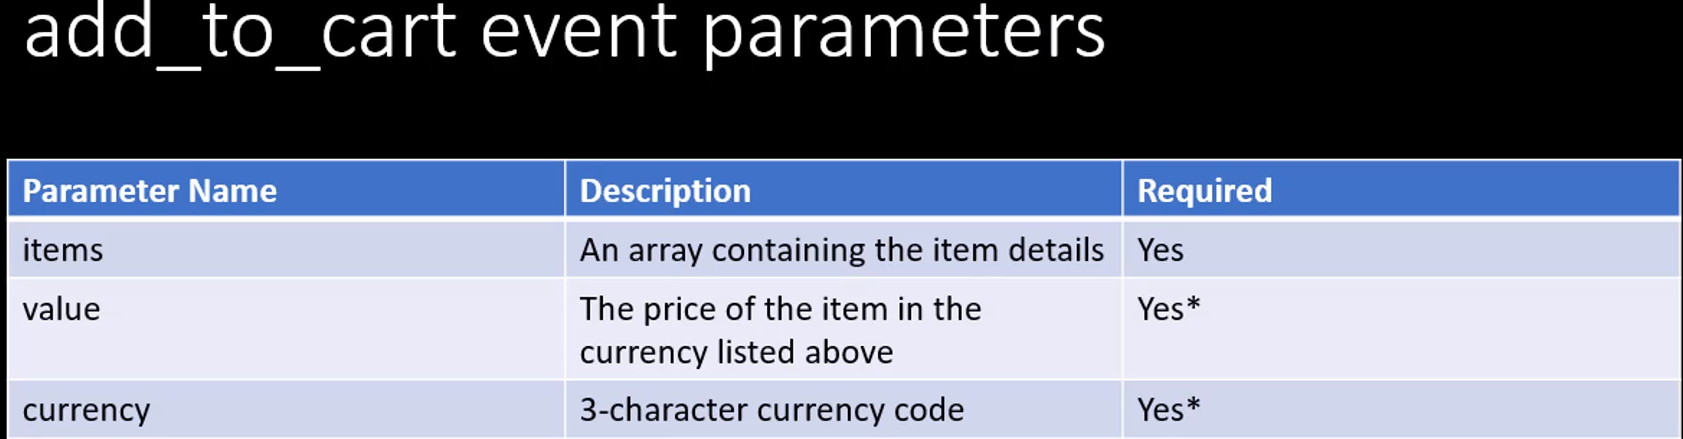 add-to-cart-parameters